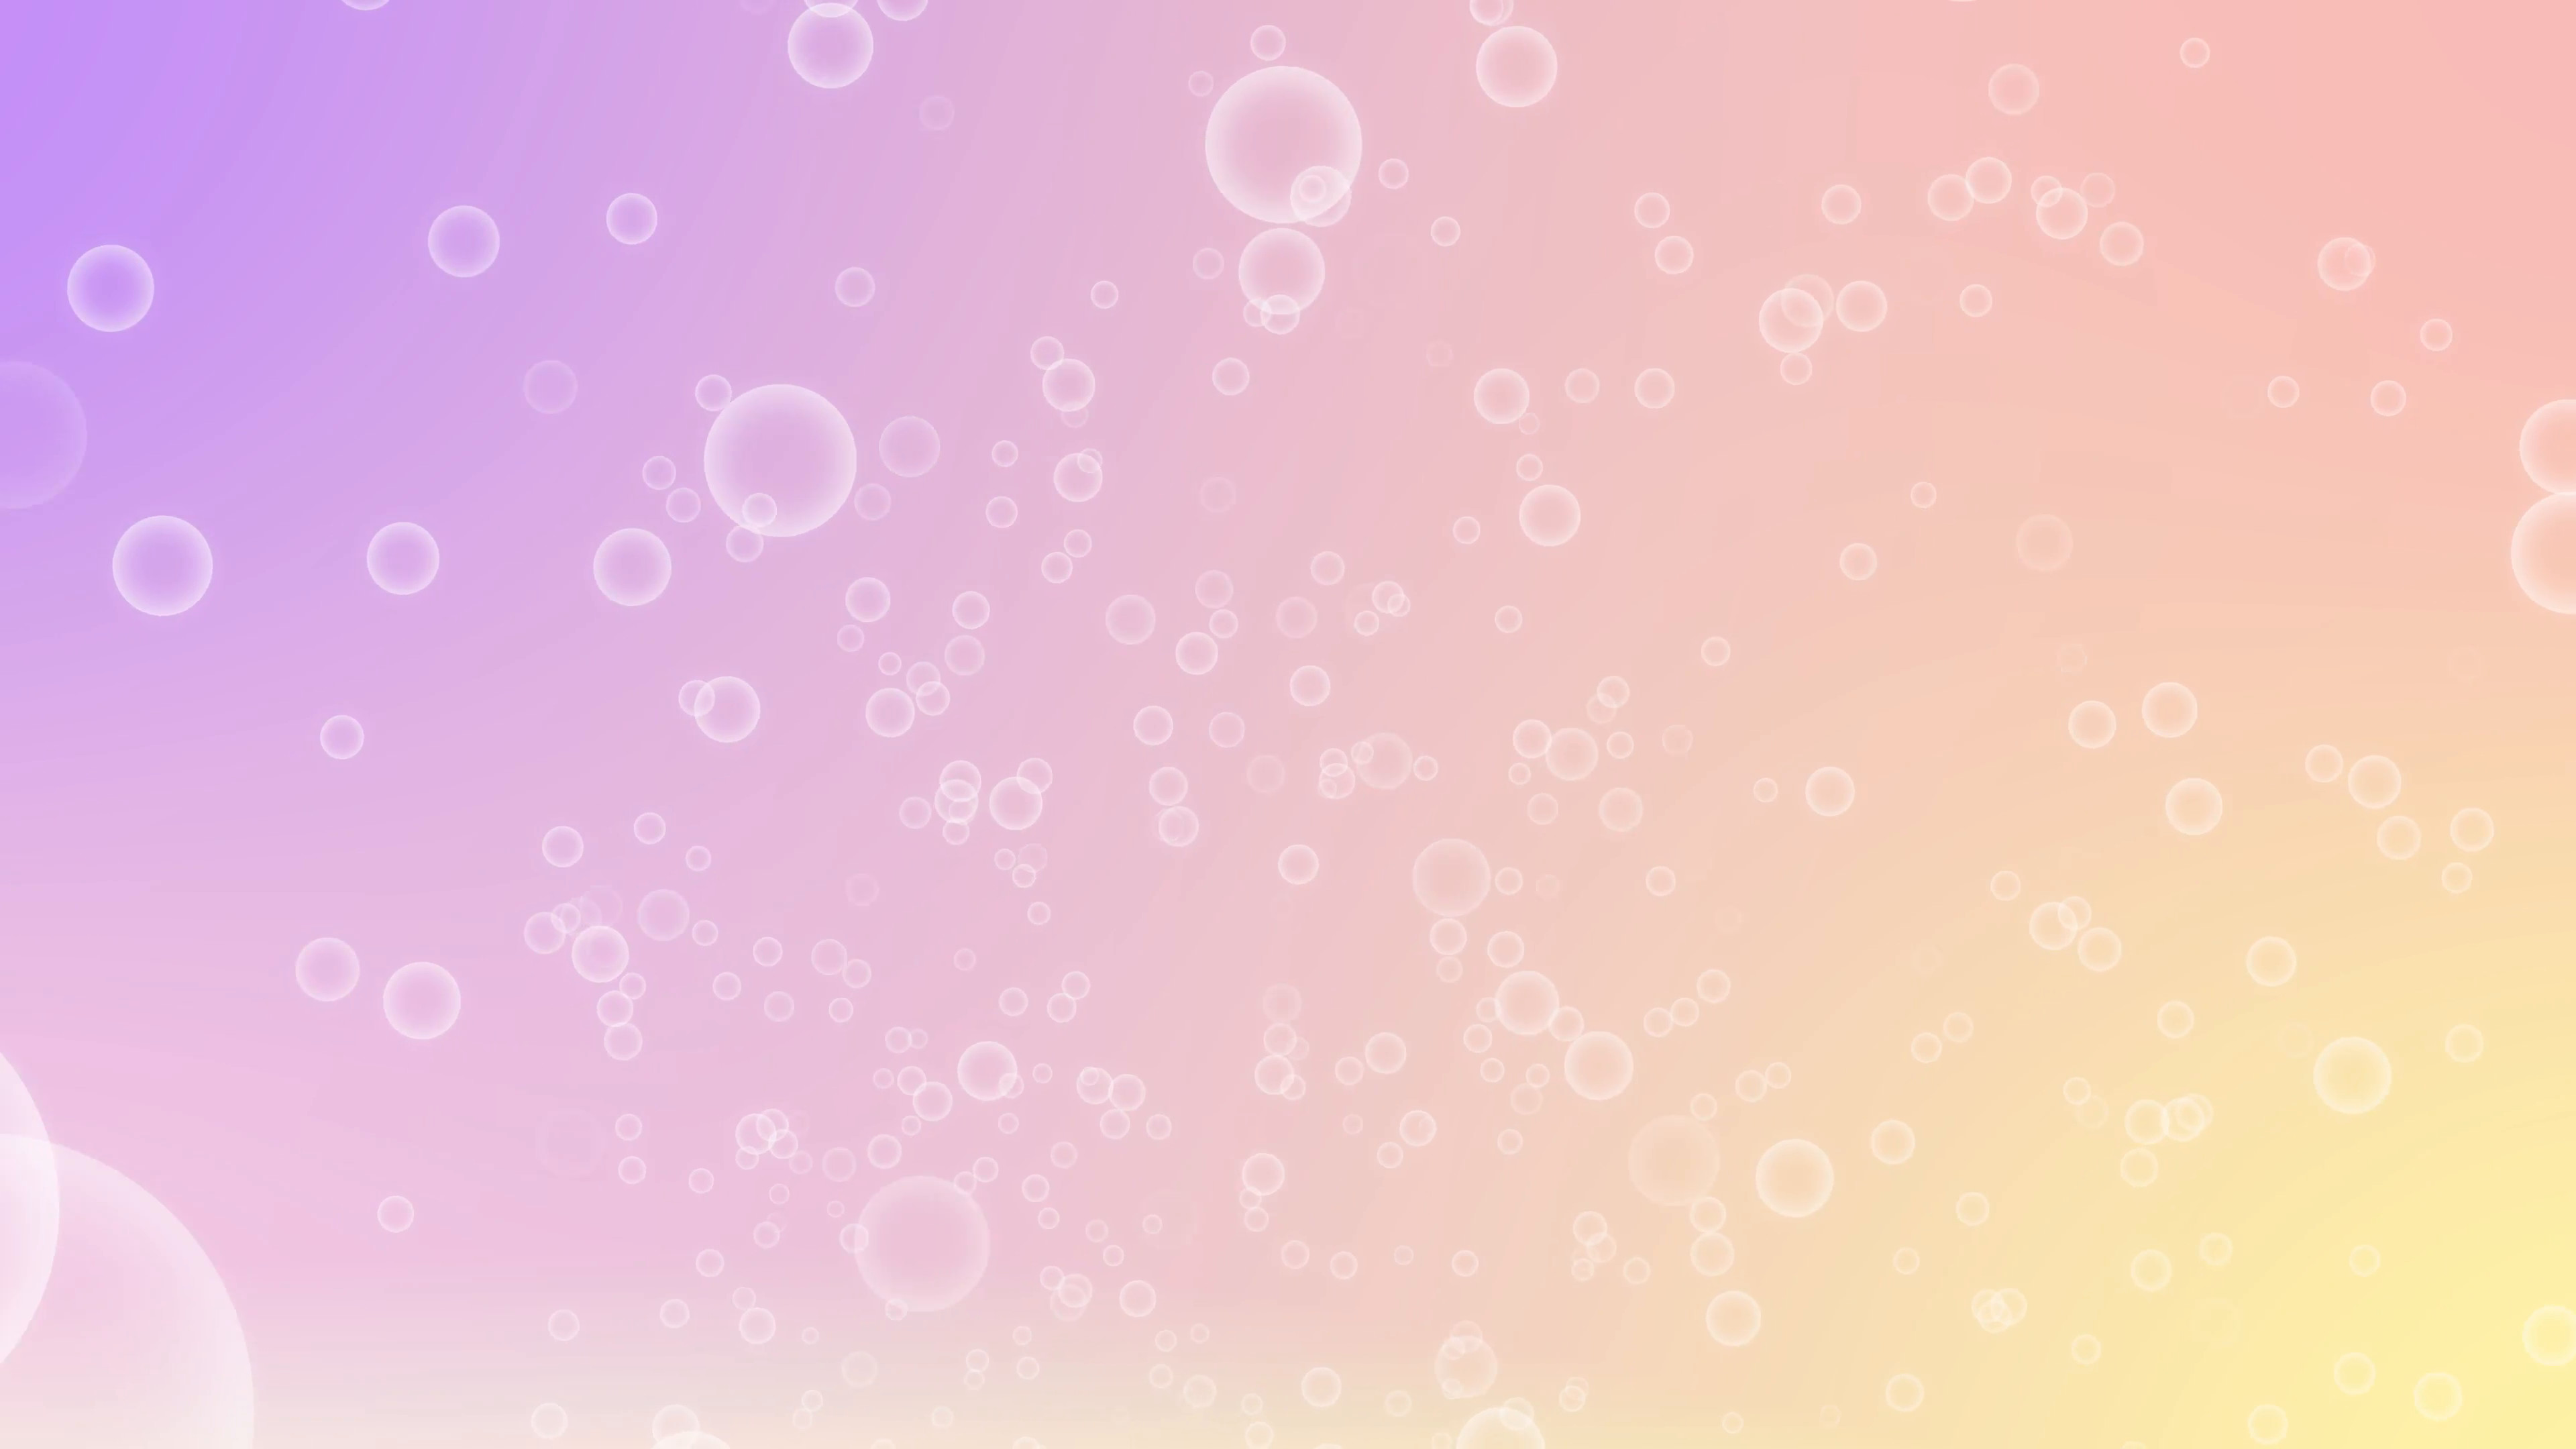 3840x2160 ... random motion abstract background on colorful summer and warm gradient  color tone blue purple yellow pink orange seamless loop animation random  motion.